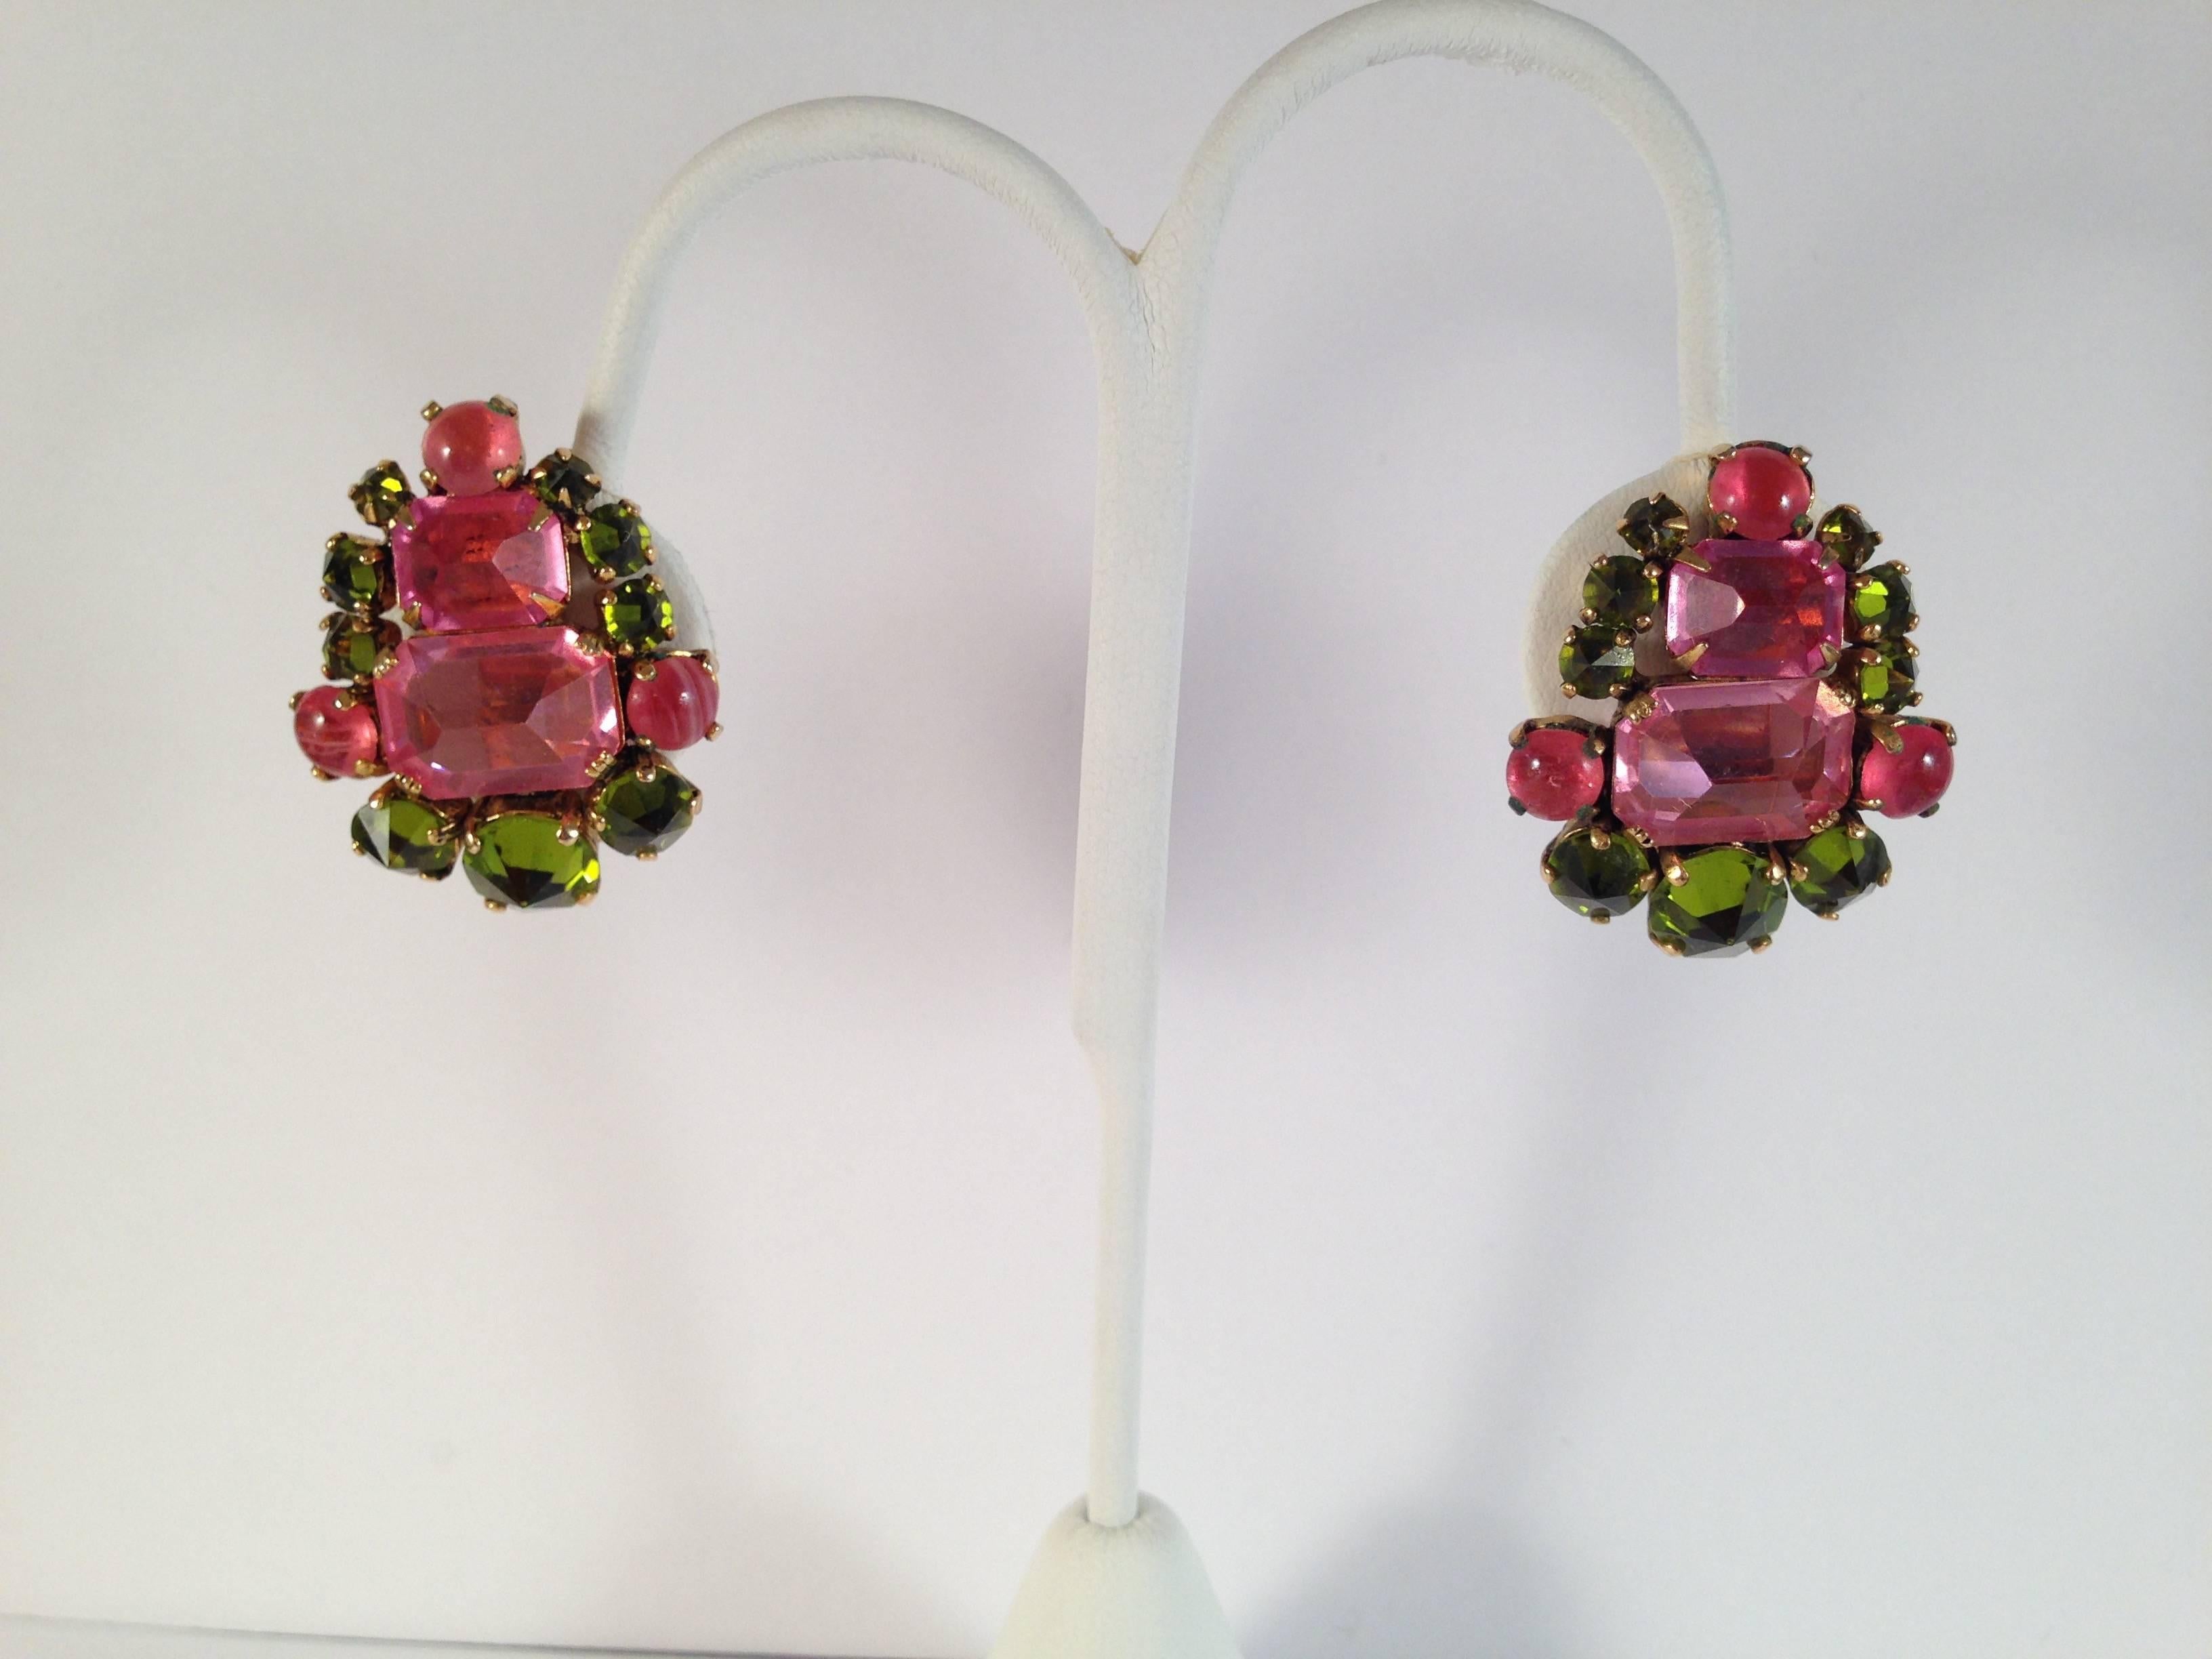 Beautiful richly colored 1960s pink and green clip on earrings by Schreiner New York. These are unsigned but have all the hallmarks of a Schreiner piece - the glass stones are set in the reverse with the pointy side set up instead of down and the